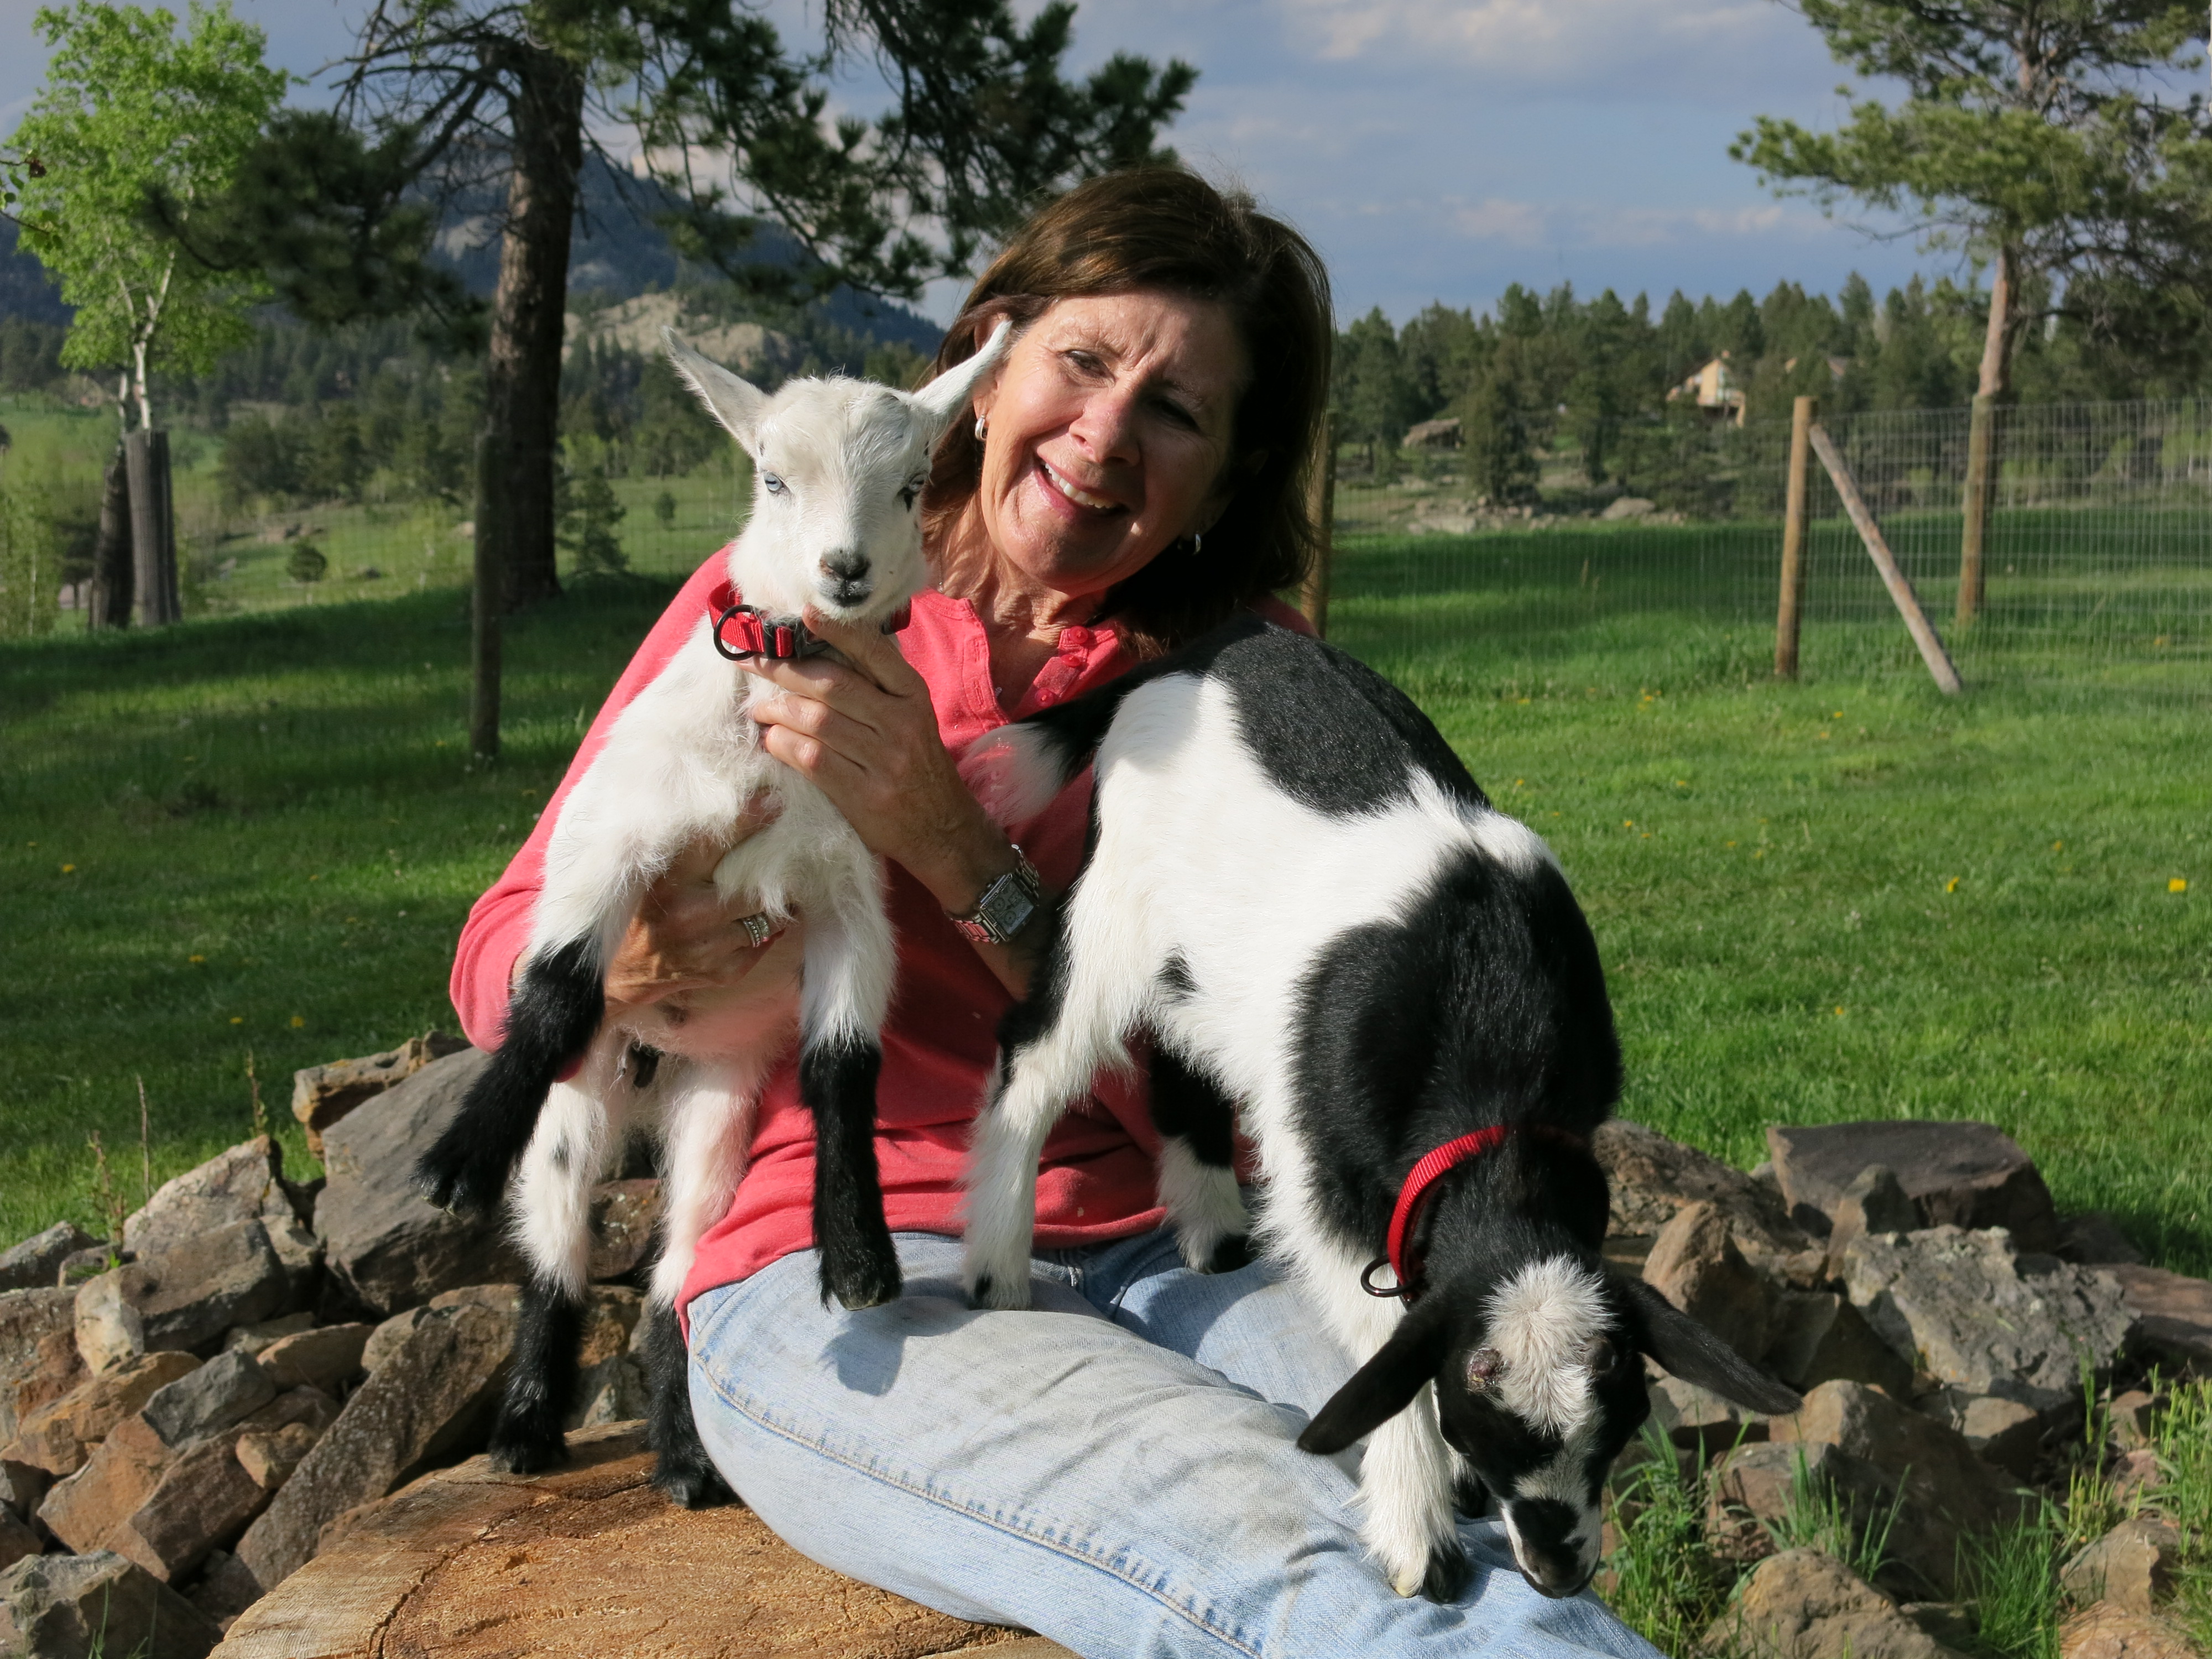 gail and goats 1